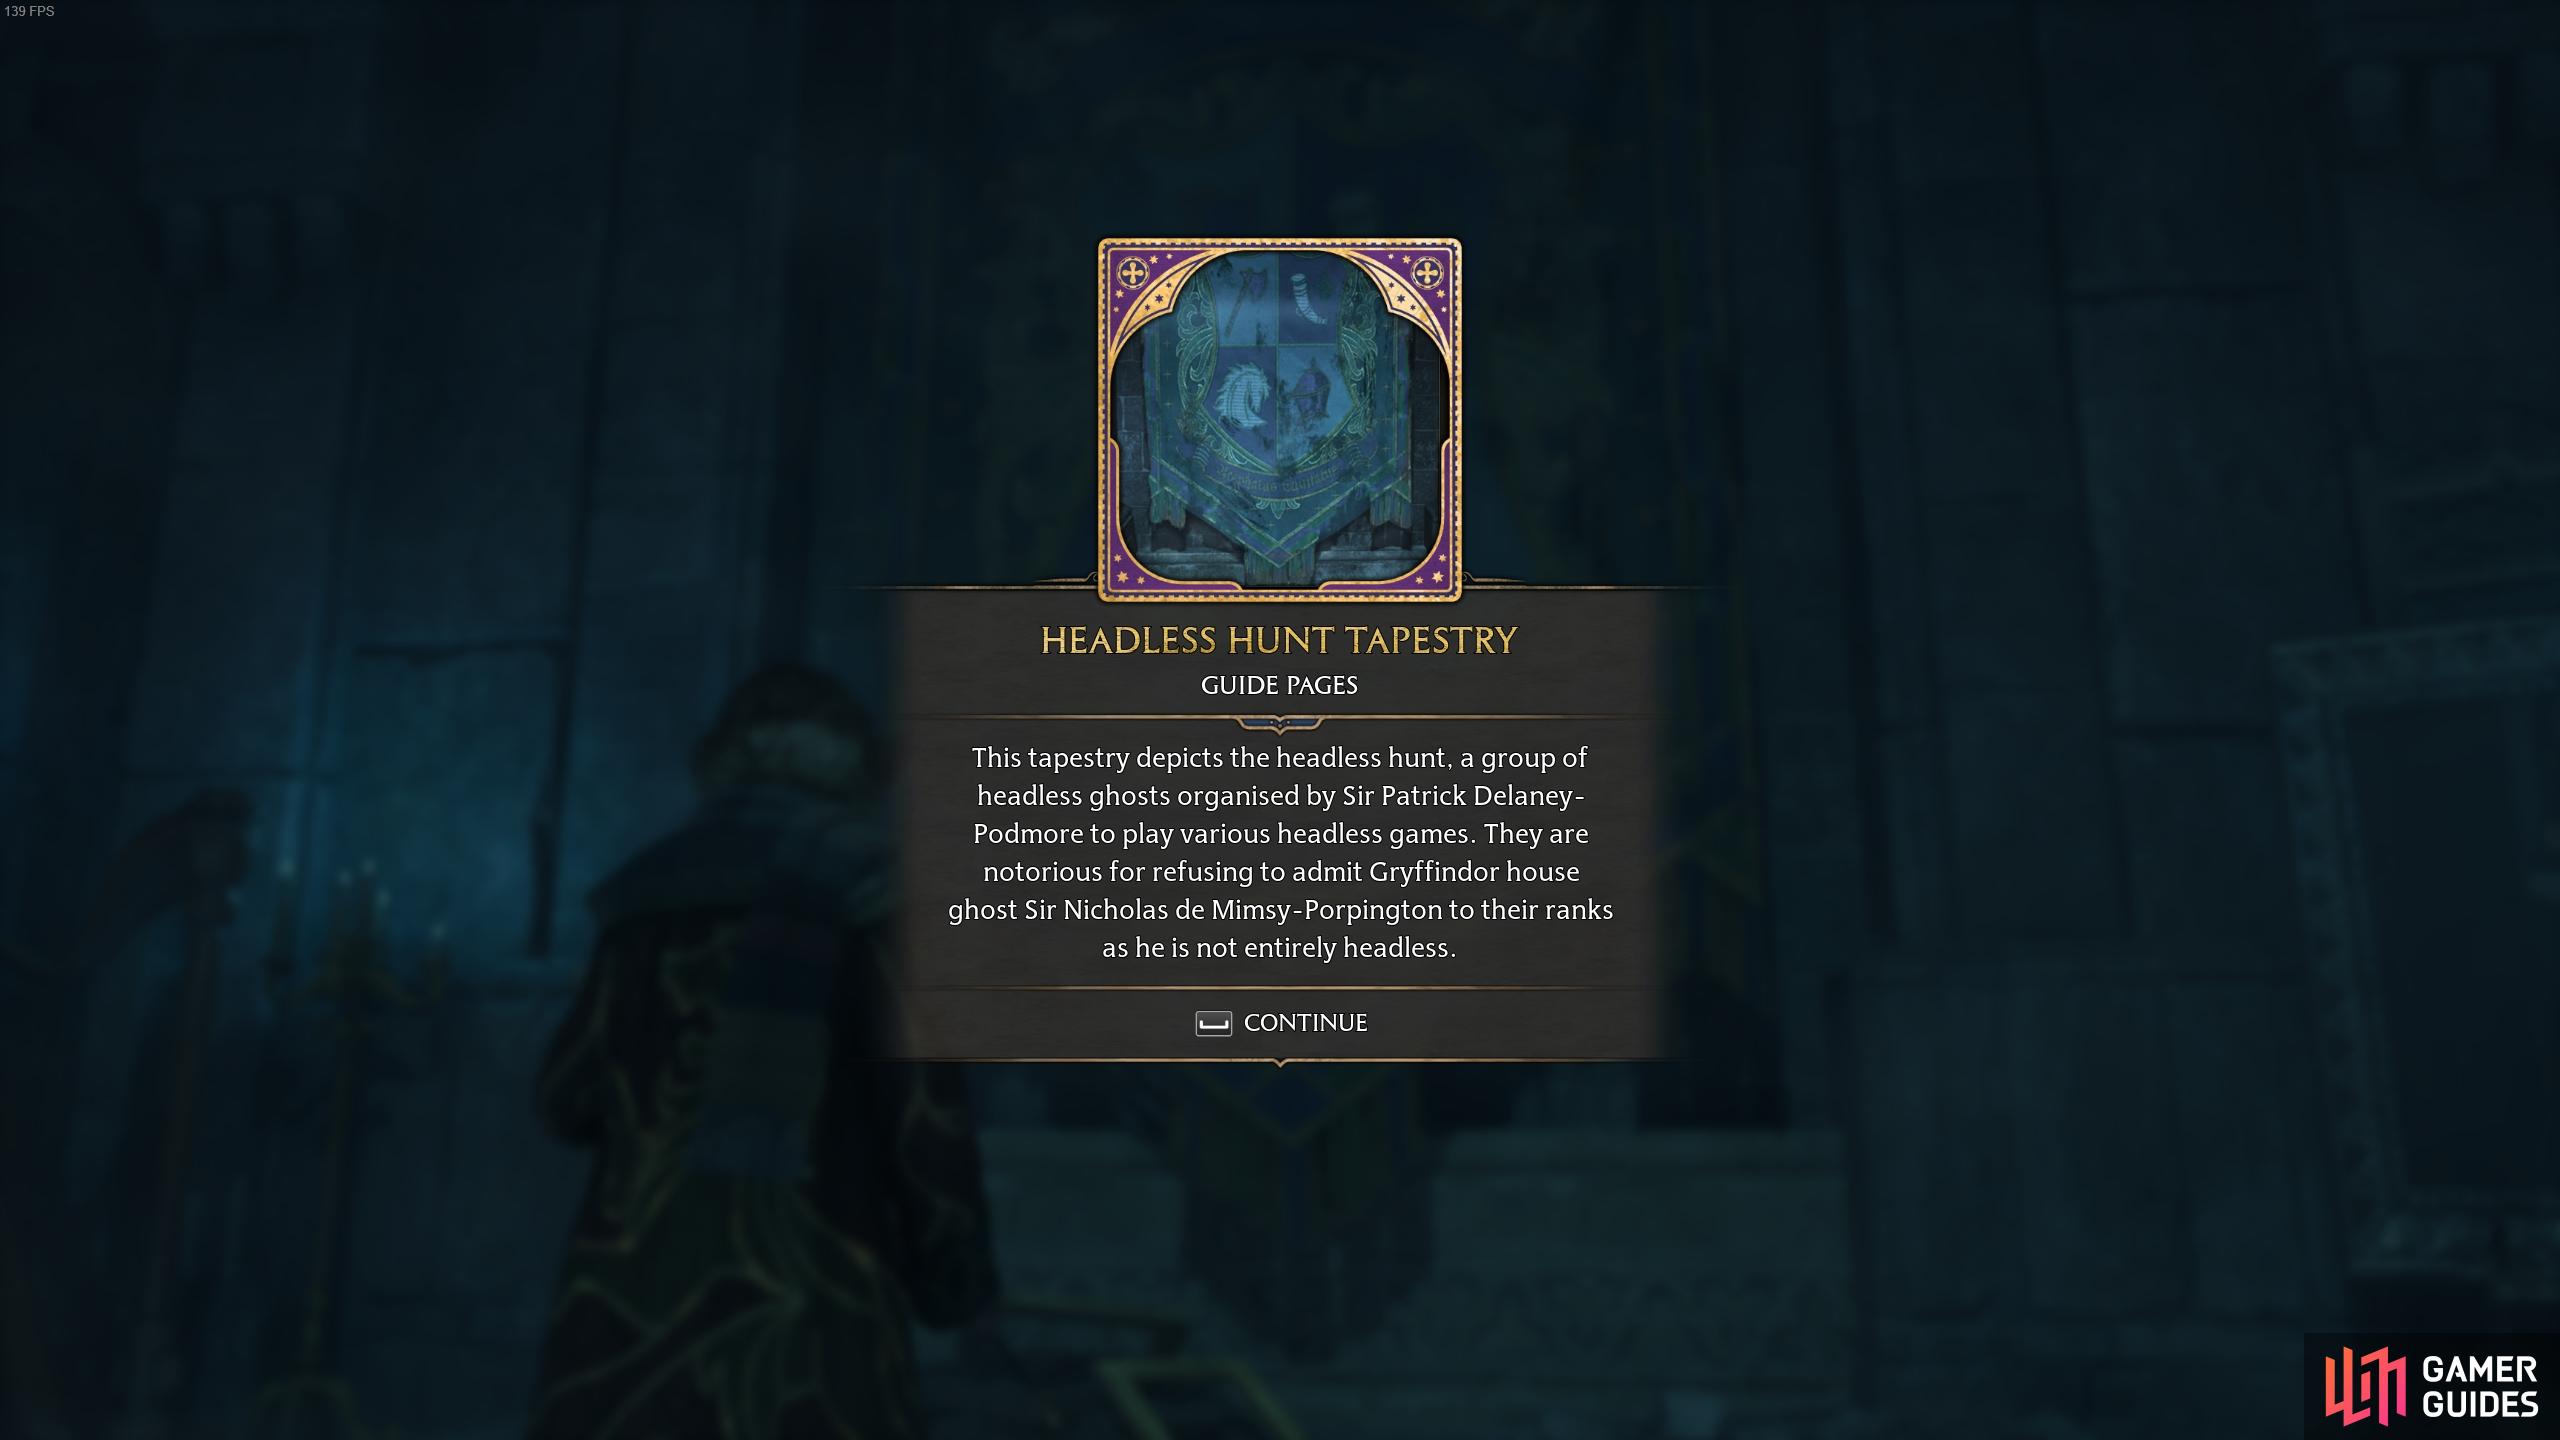 The description for the Headless Hunt Tapestry.